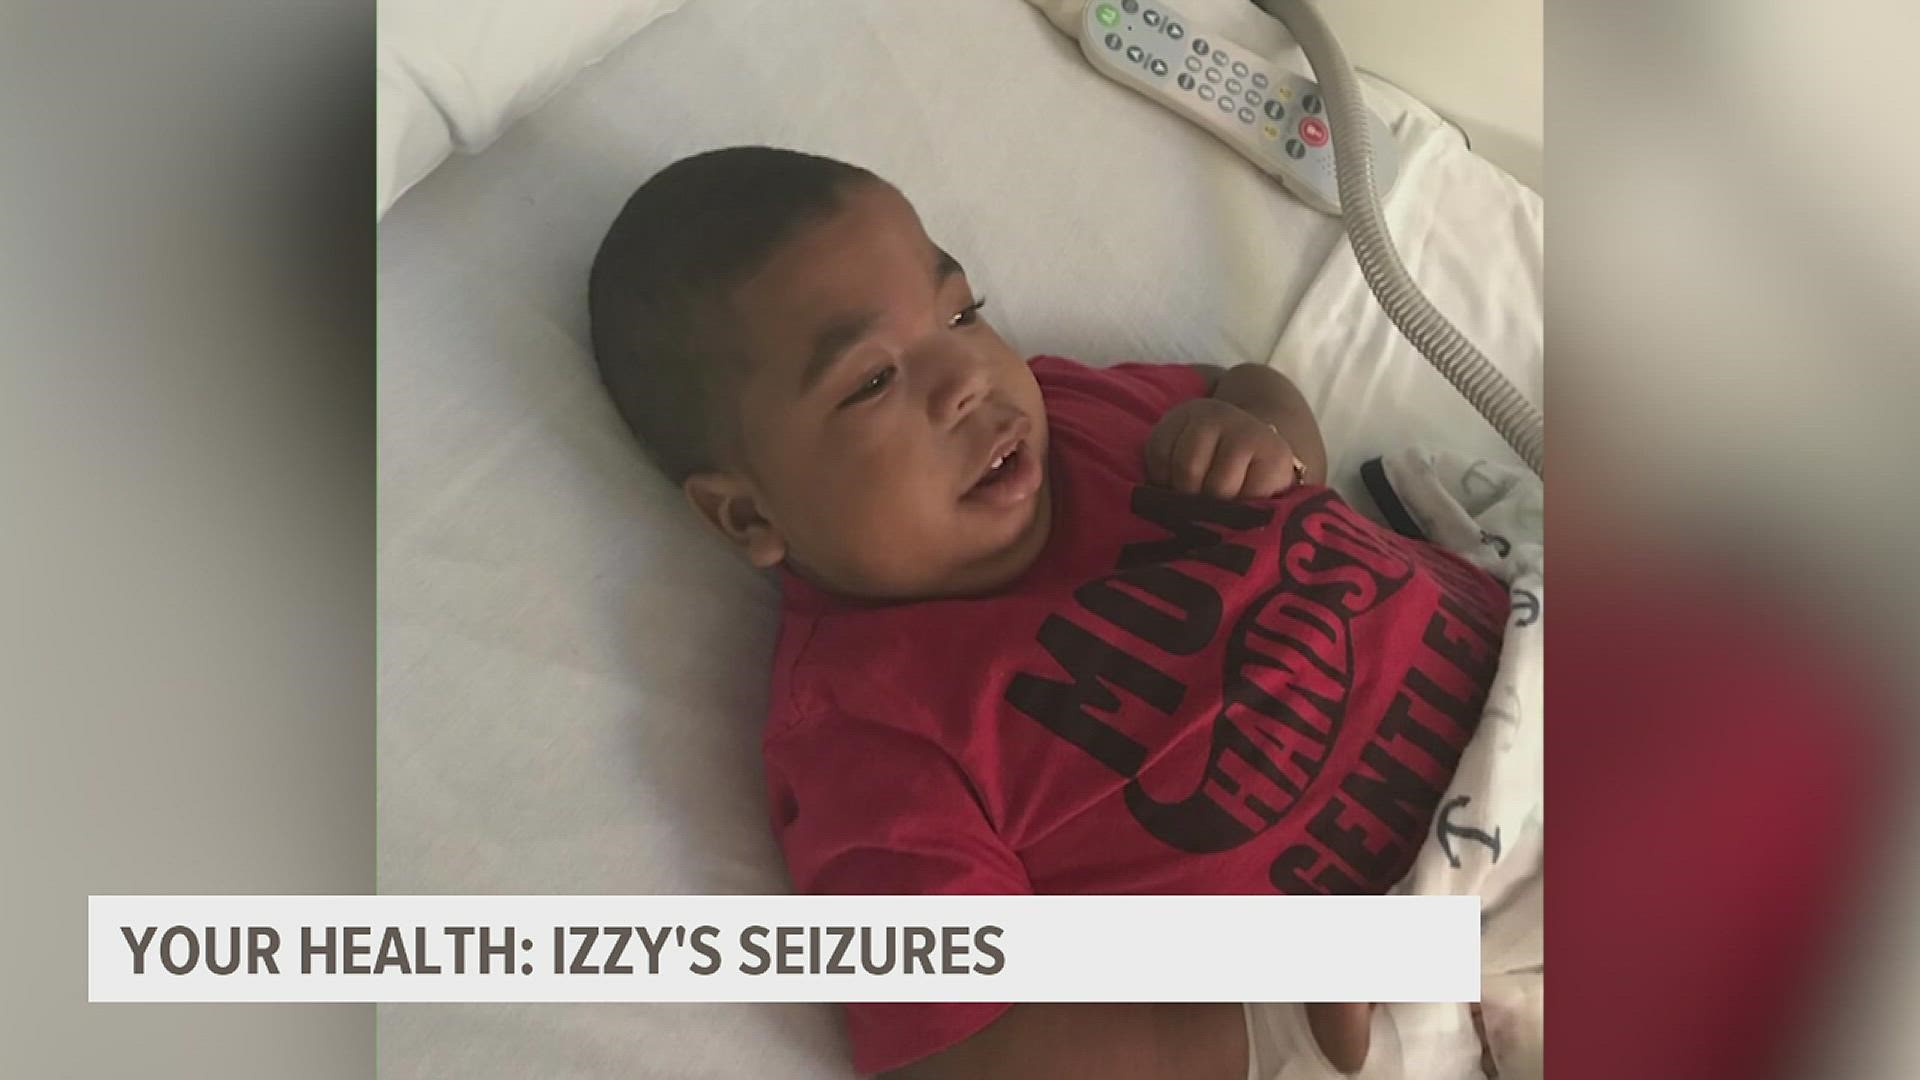 Pediatric neurosurgeons use an electrical grid to pinpoint where life-threatening seizures can start.